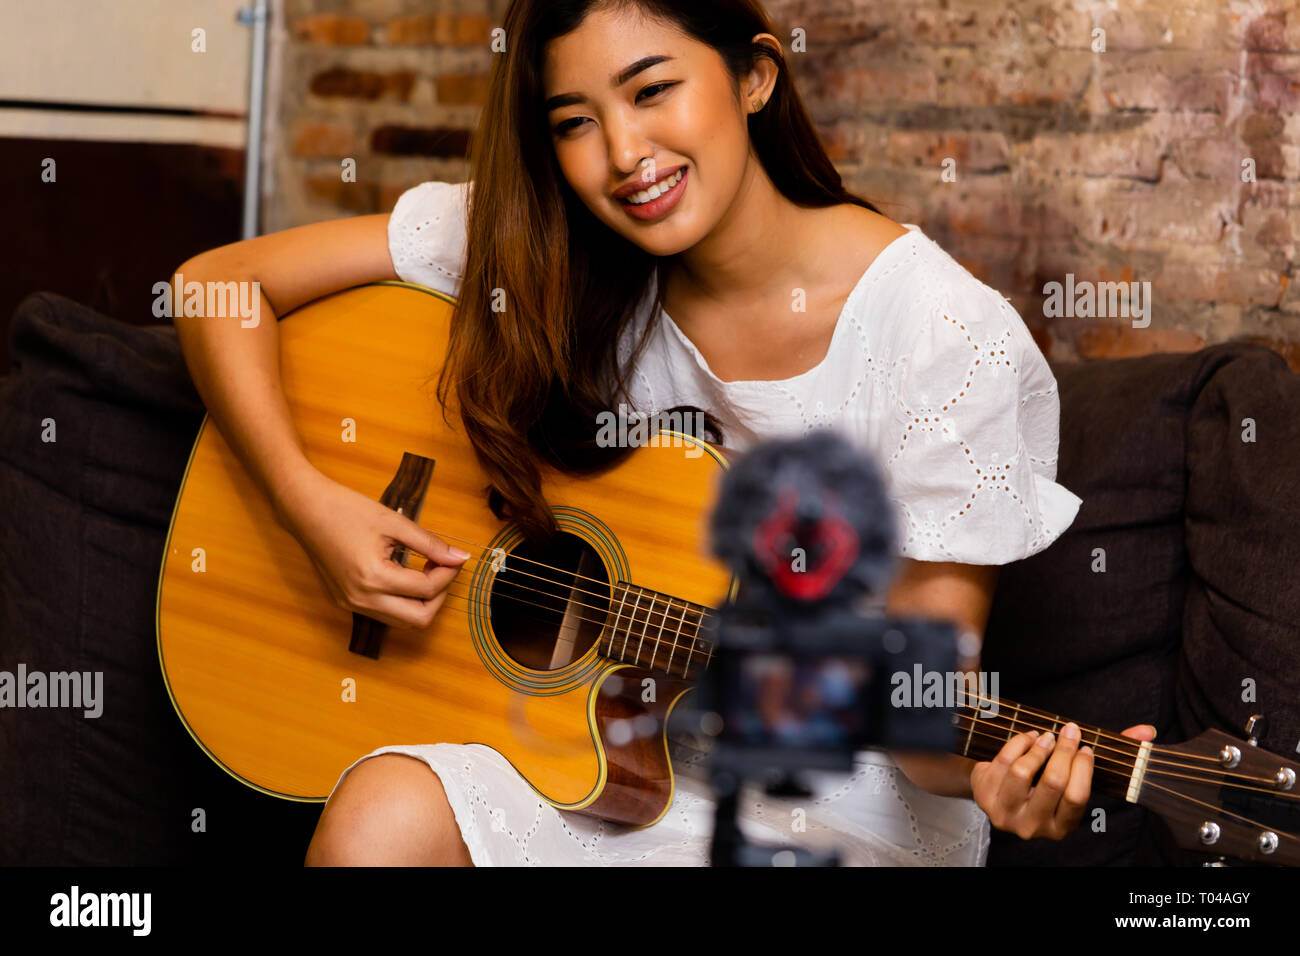 Lovely Asian female smiling and playing cover song while sitting on couch in front of video camera Stock Photo